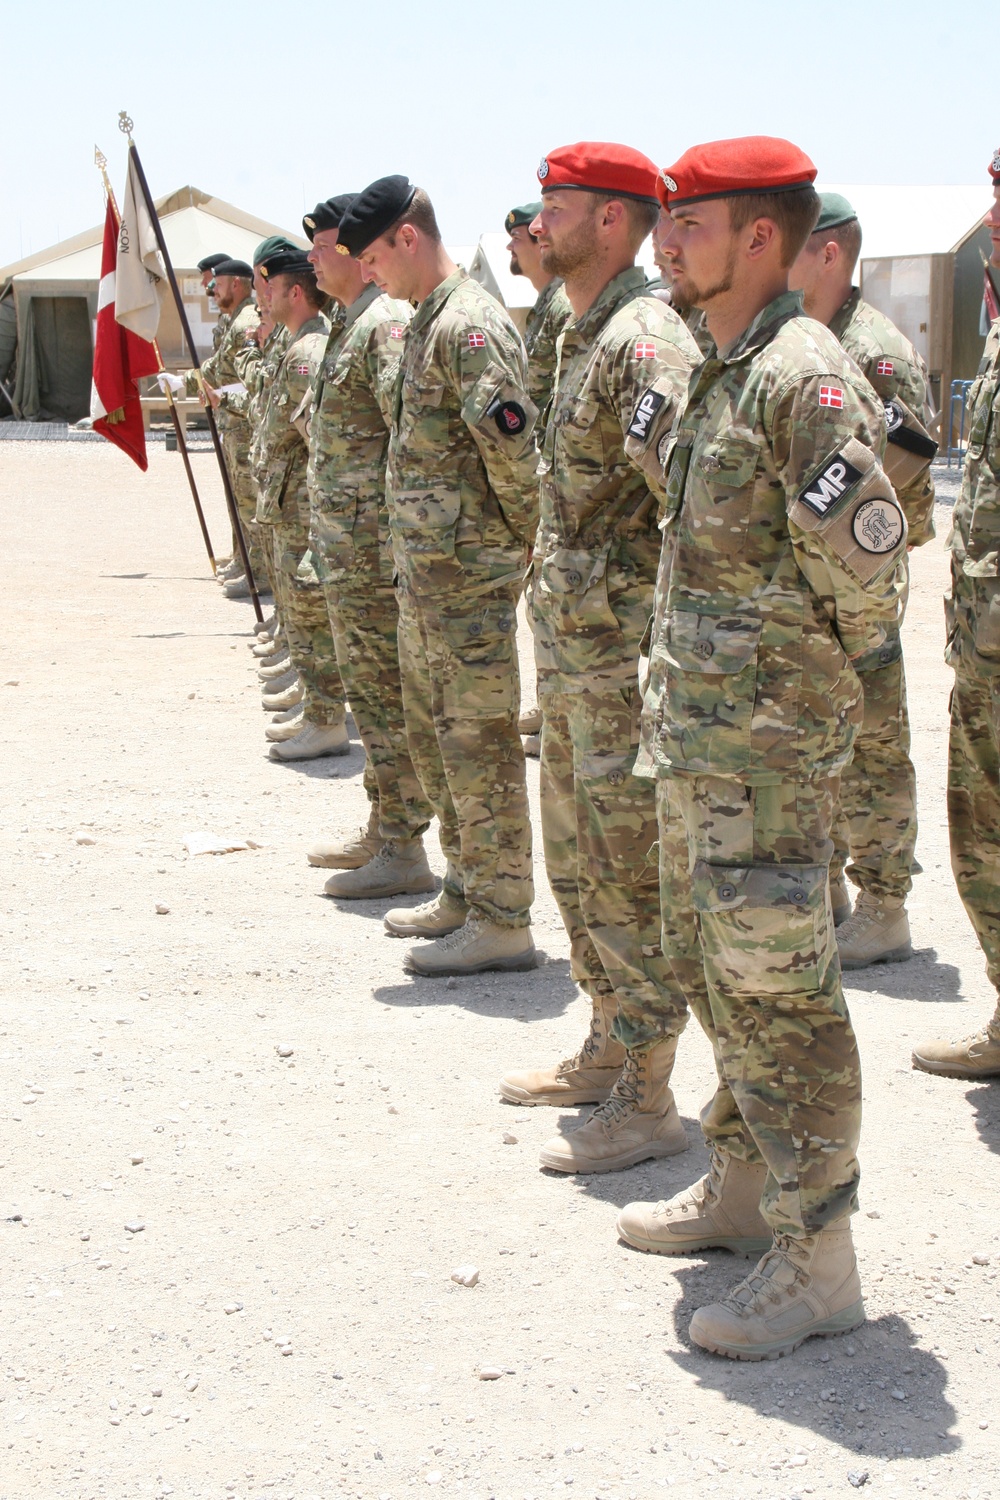 DVIDS - Images - Denmark Army ends mission in Afghanistan, bids ...